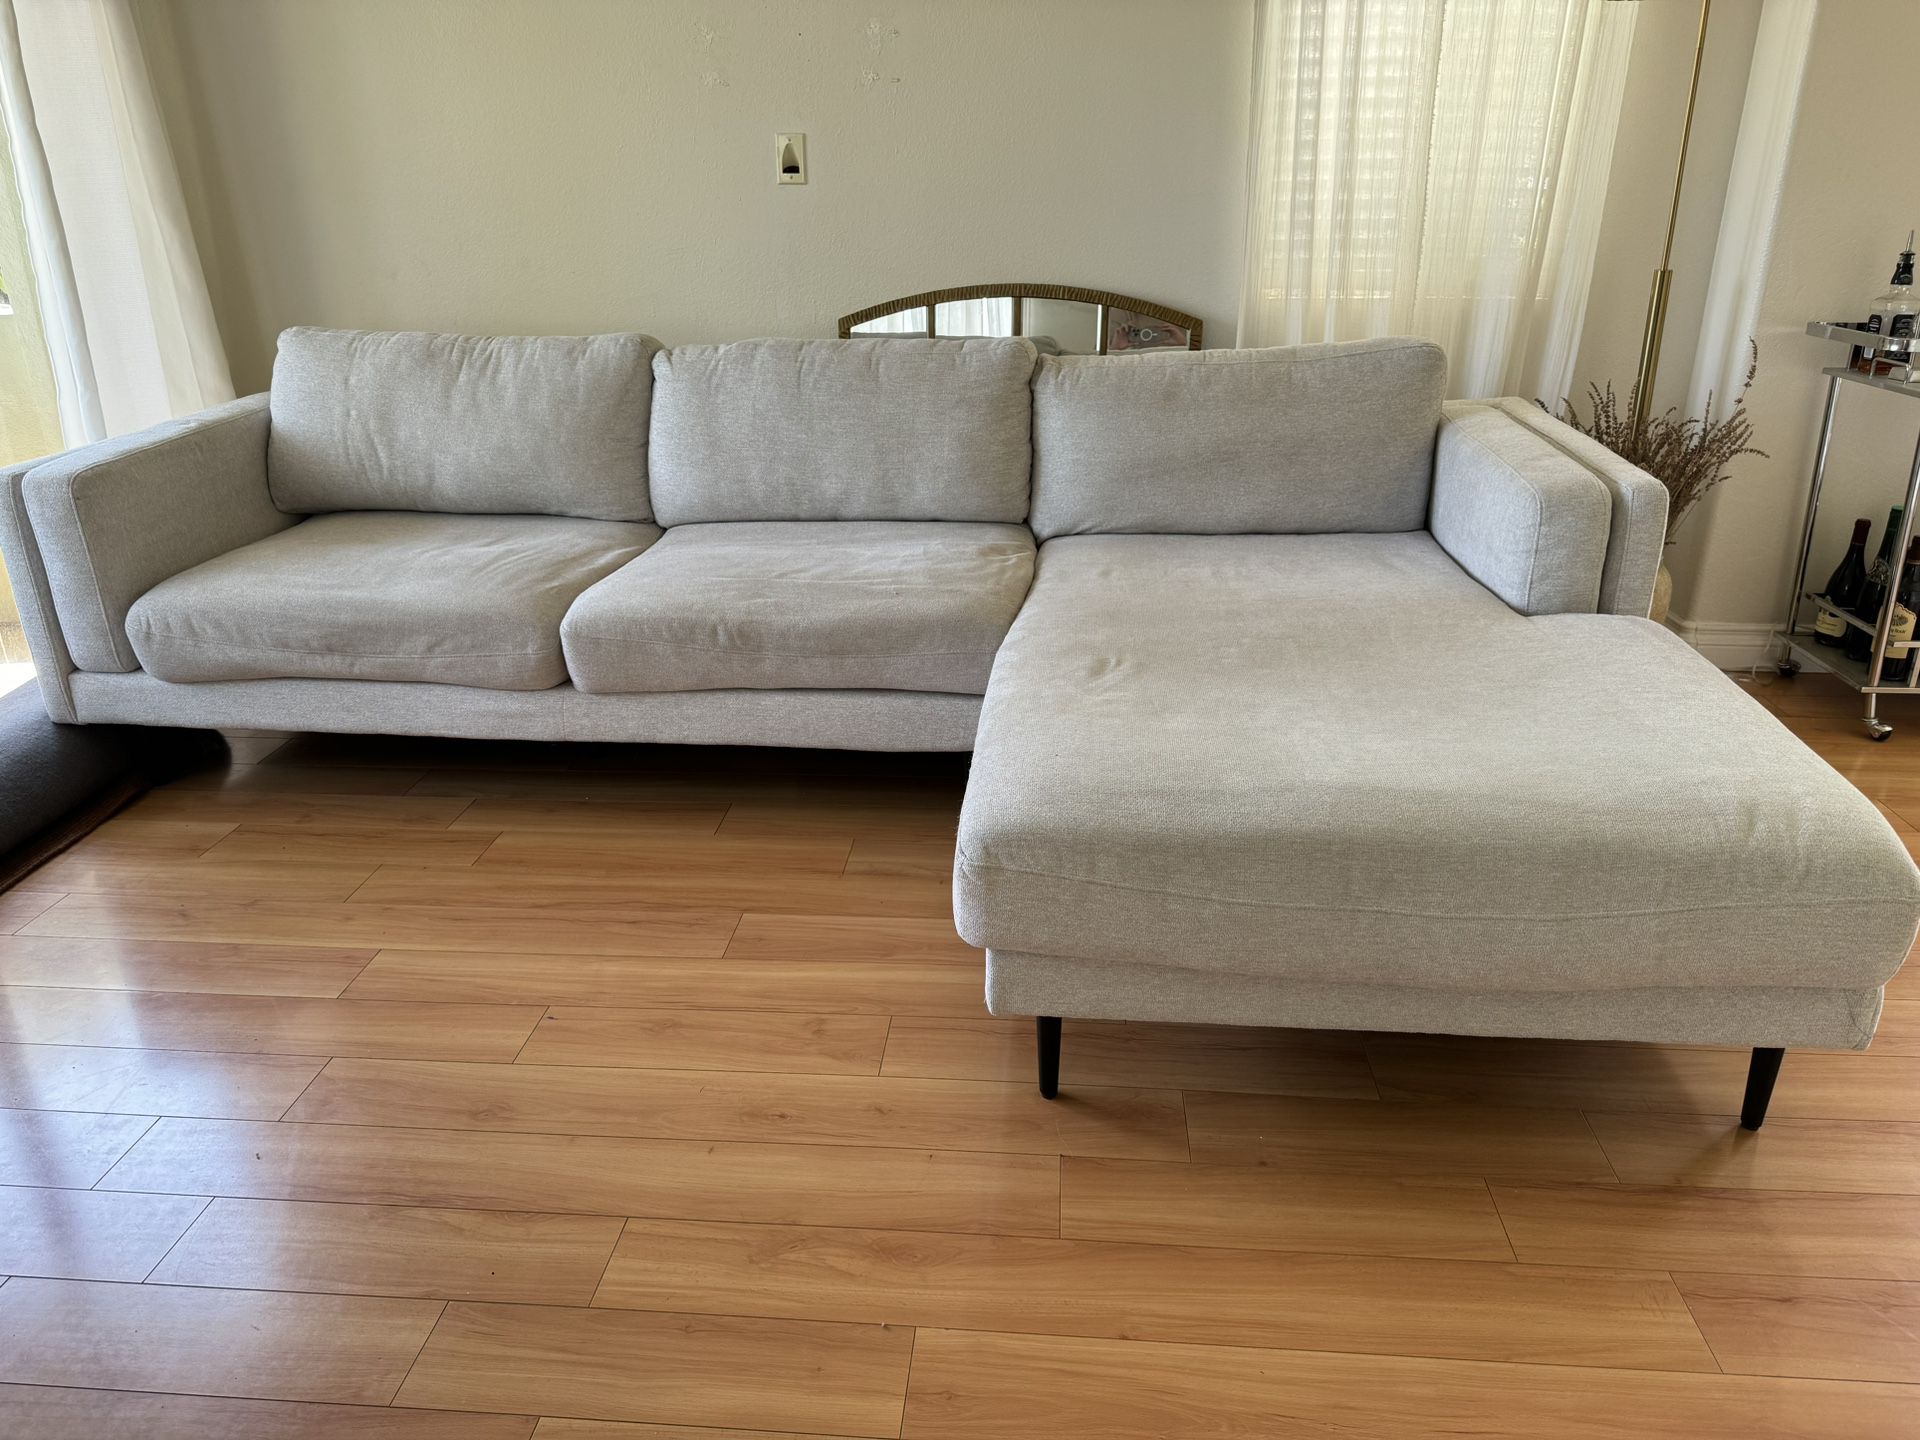 Luxurious Beige Sectional Sofa